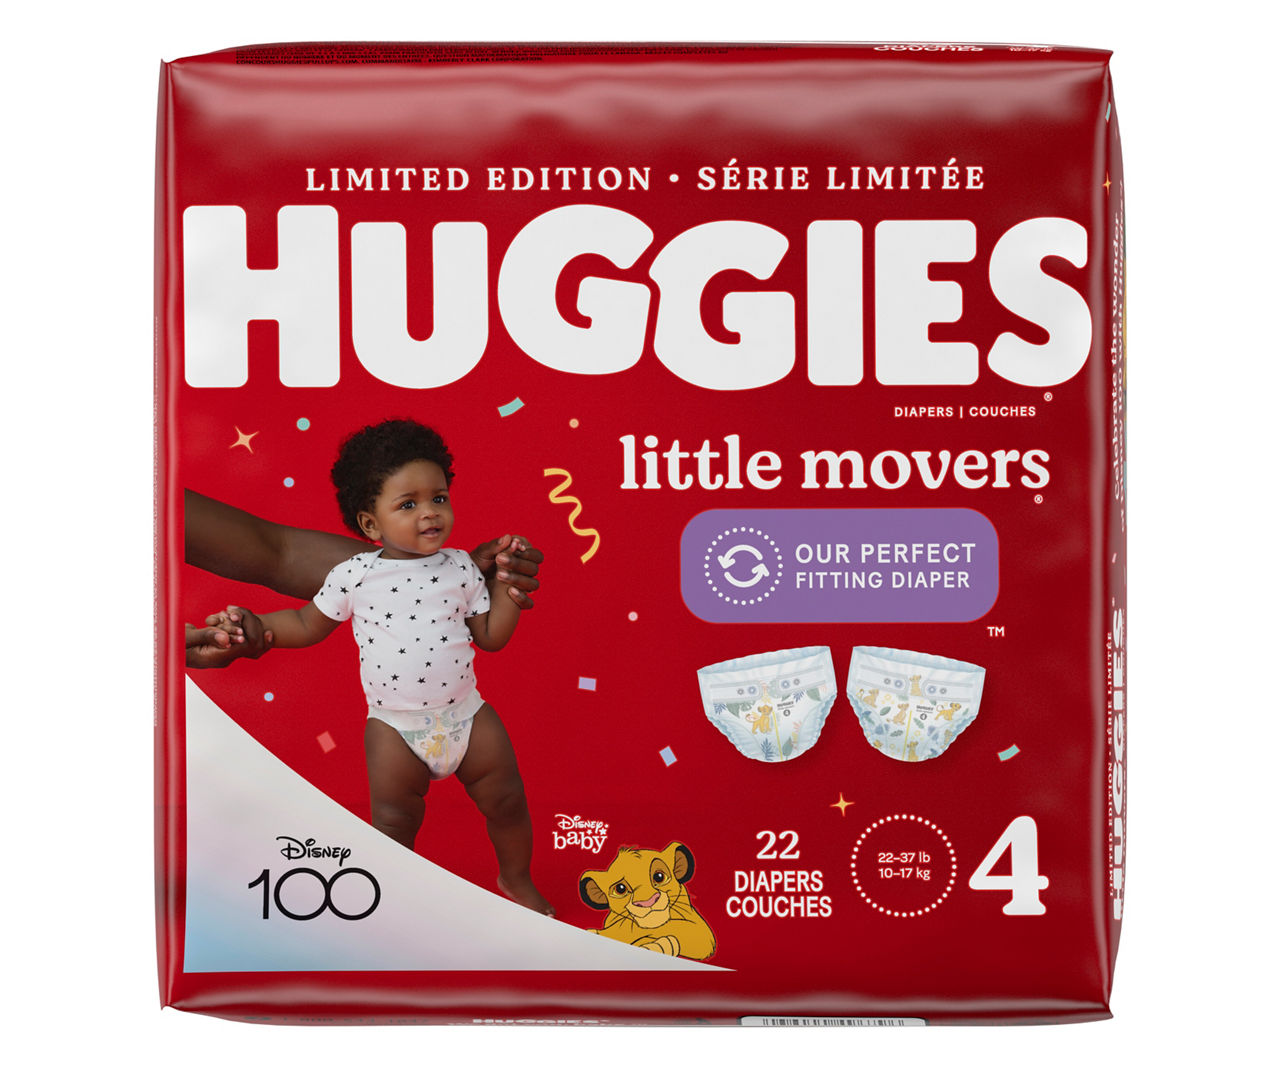 Huggies Little Movers Diapers, Fitting, Disney Baby, 4 (22-37 Lb)